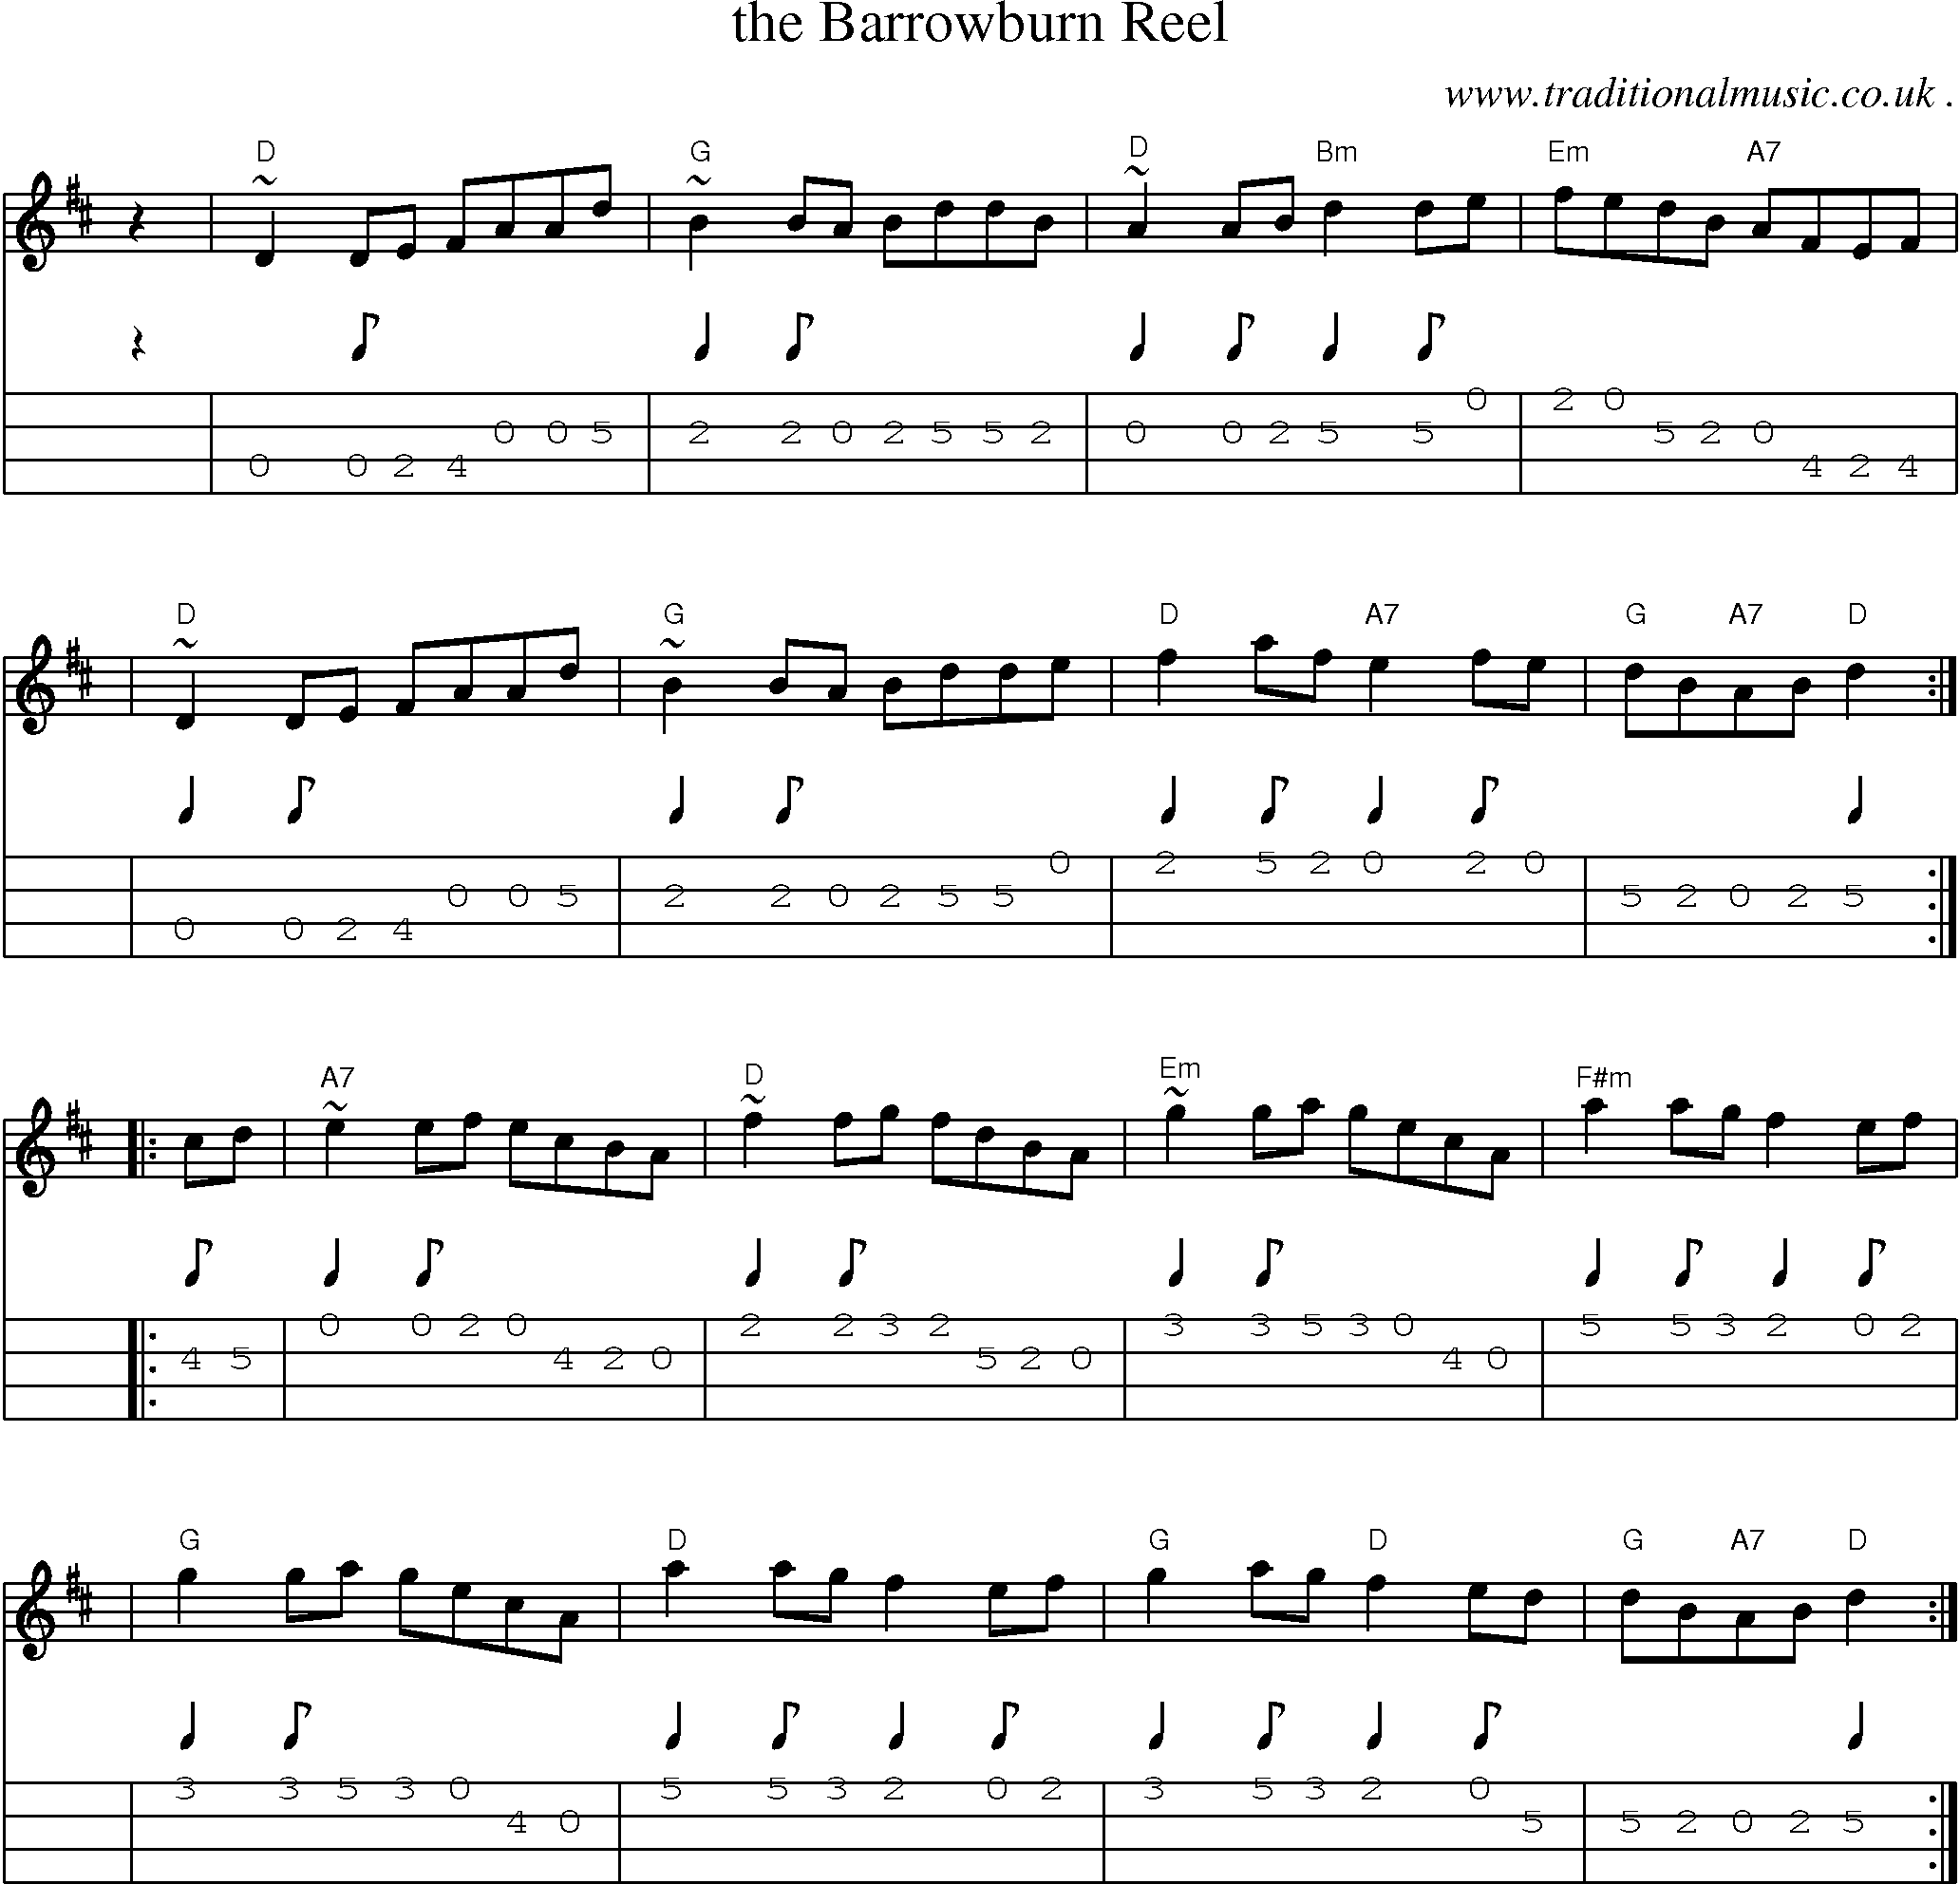 Sheet-music  score, Chords and Mandolin Tabs for The Barrowburn Reel